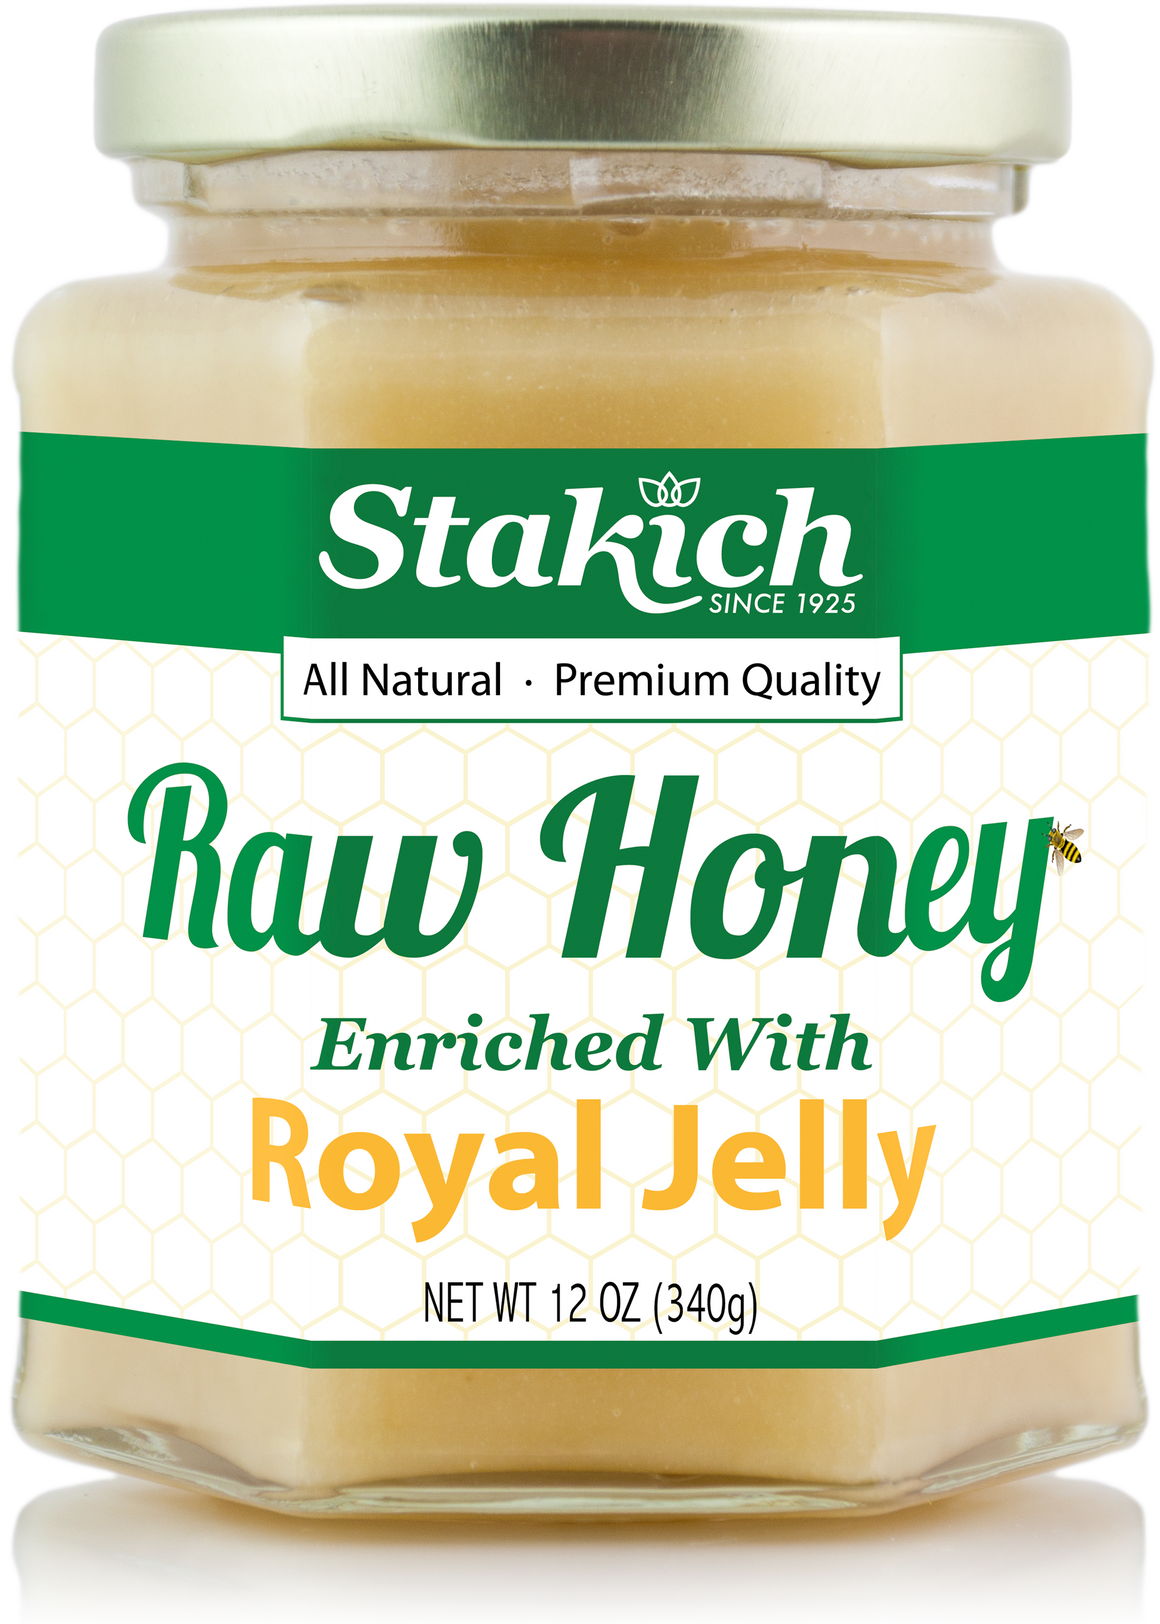 Case of Royal Jelly Enriched Raw Honey (12 oz) - Stakich